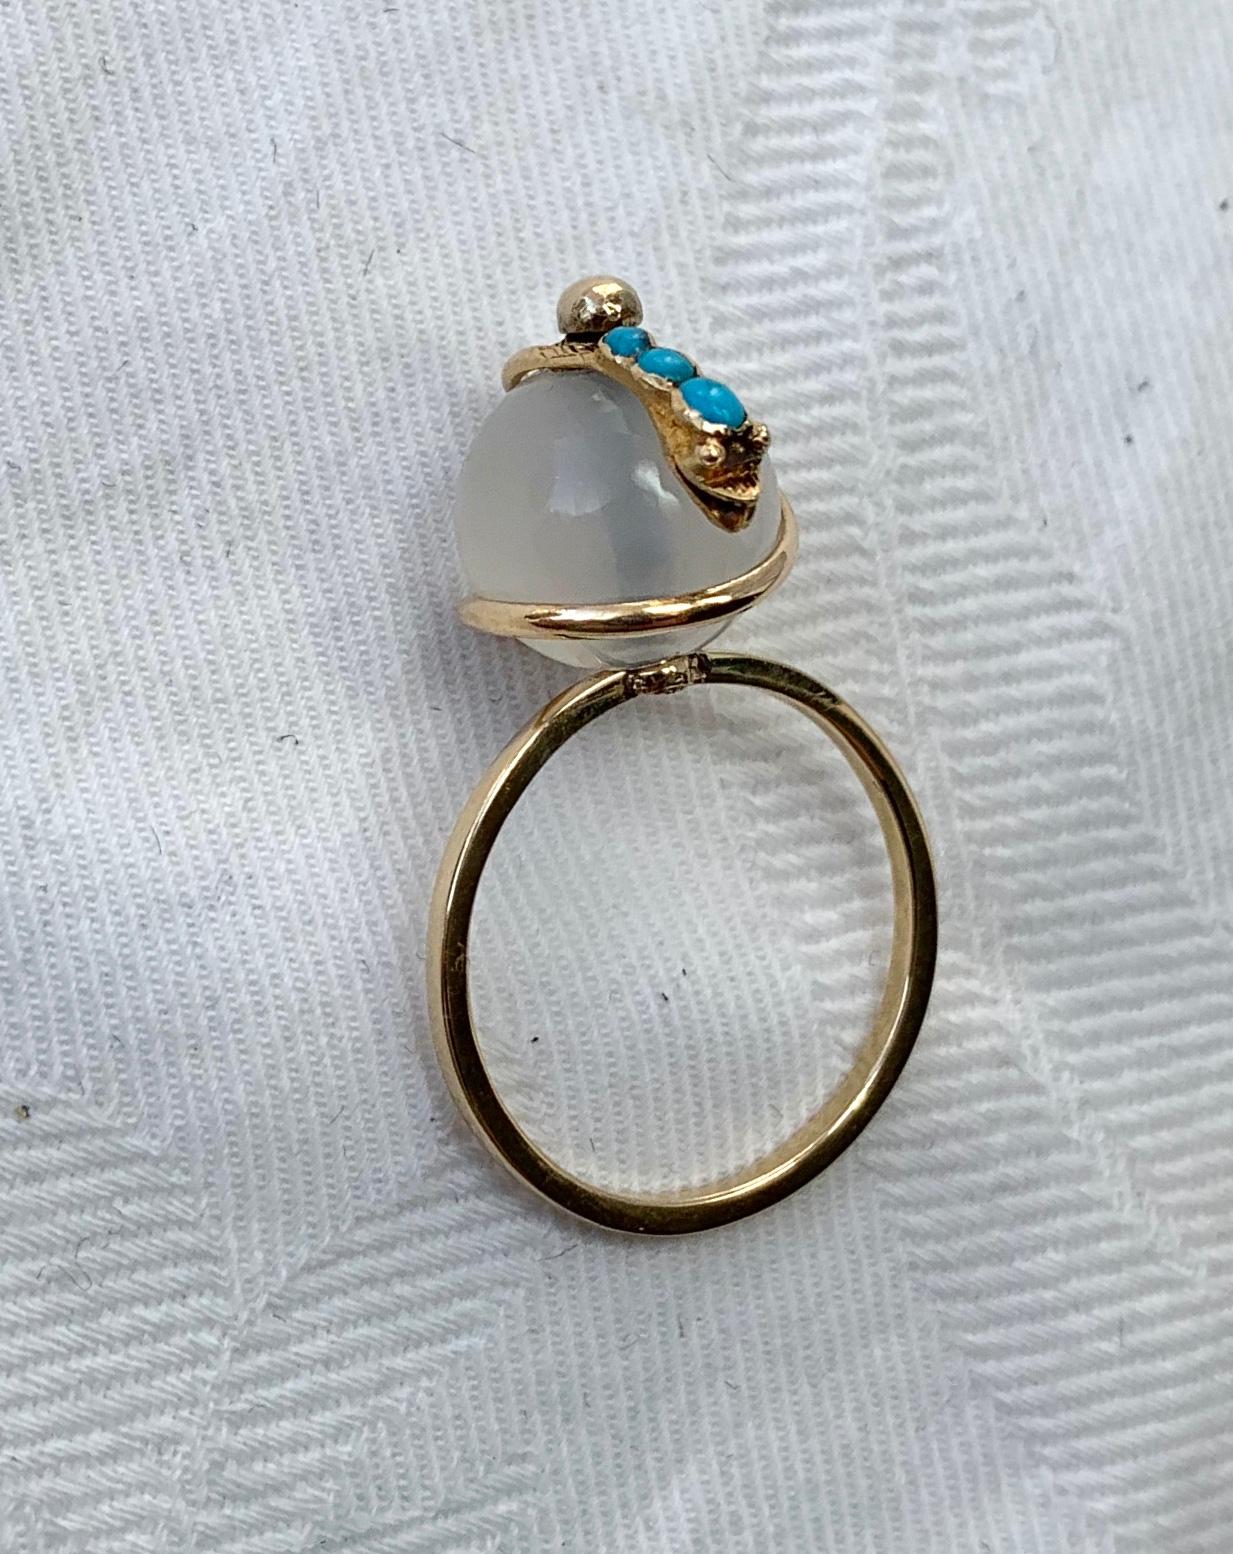 A rare and wonderful antique Victorian Turquoise Moonstone Snake Ring.  The snake is depicted circling the globe or an egg. 
The snake is set with beautiful Persian Turquoise cabochons.  The globe is either moonstone or white agate.  The gold is a